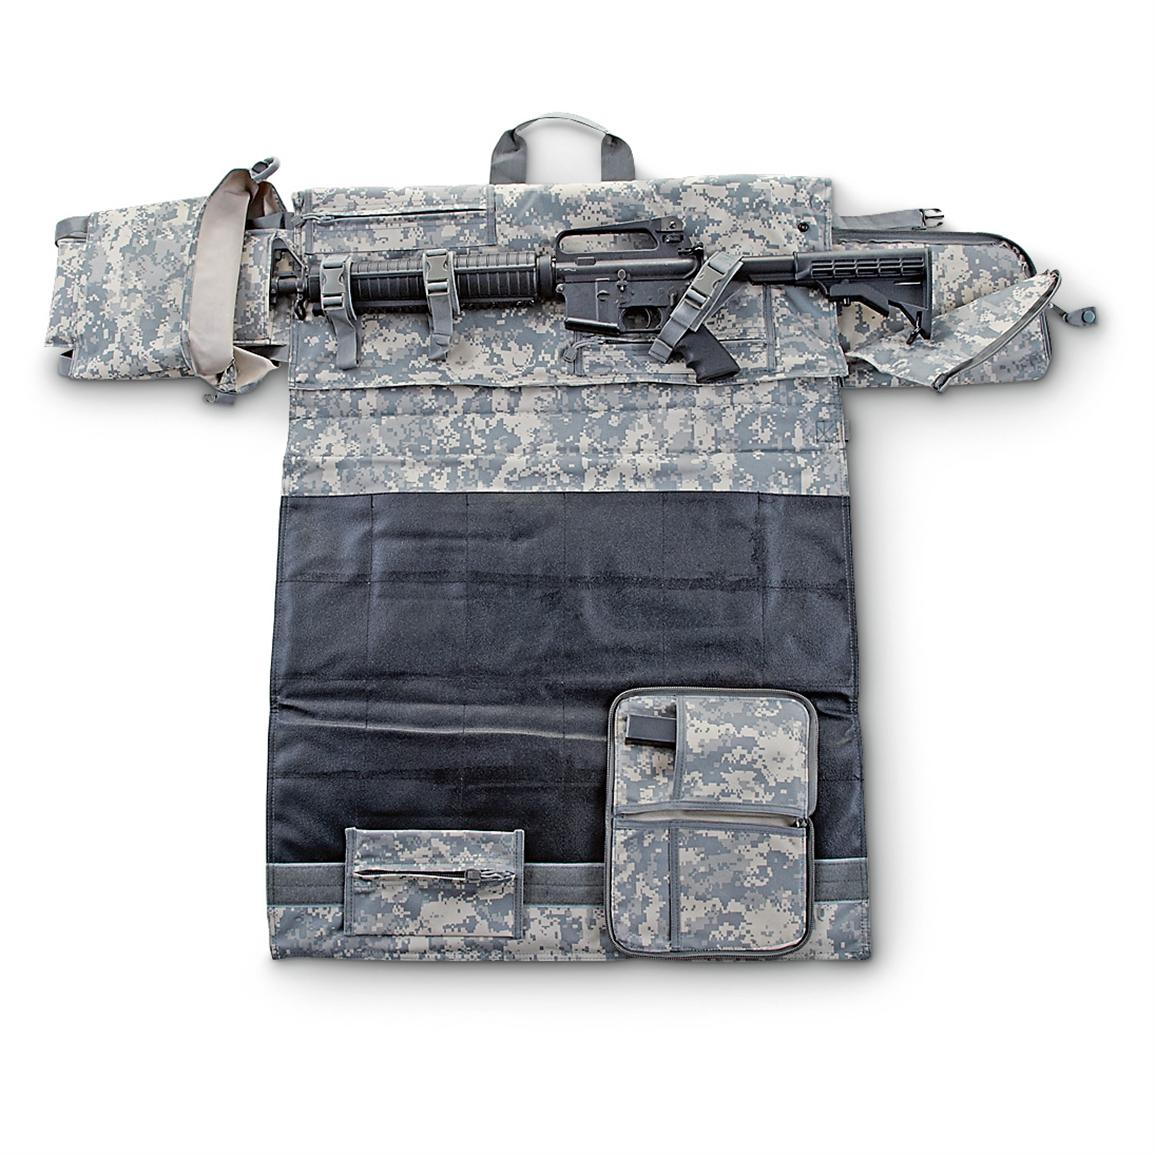 Fox Tactical™ Snipers Mat 582447, Range Bags at Sportsman's Guide